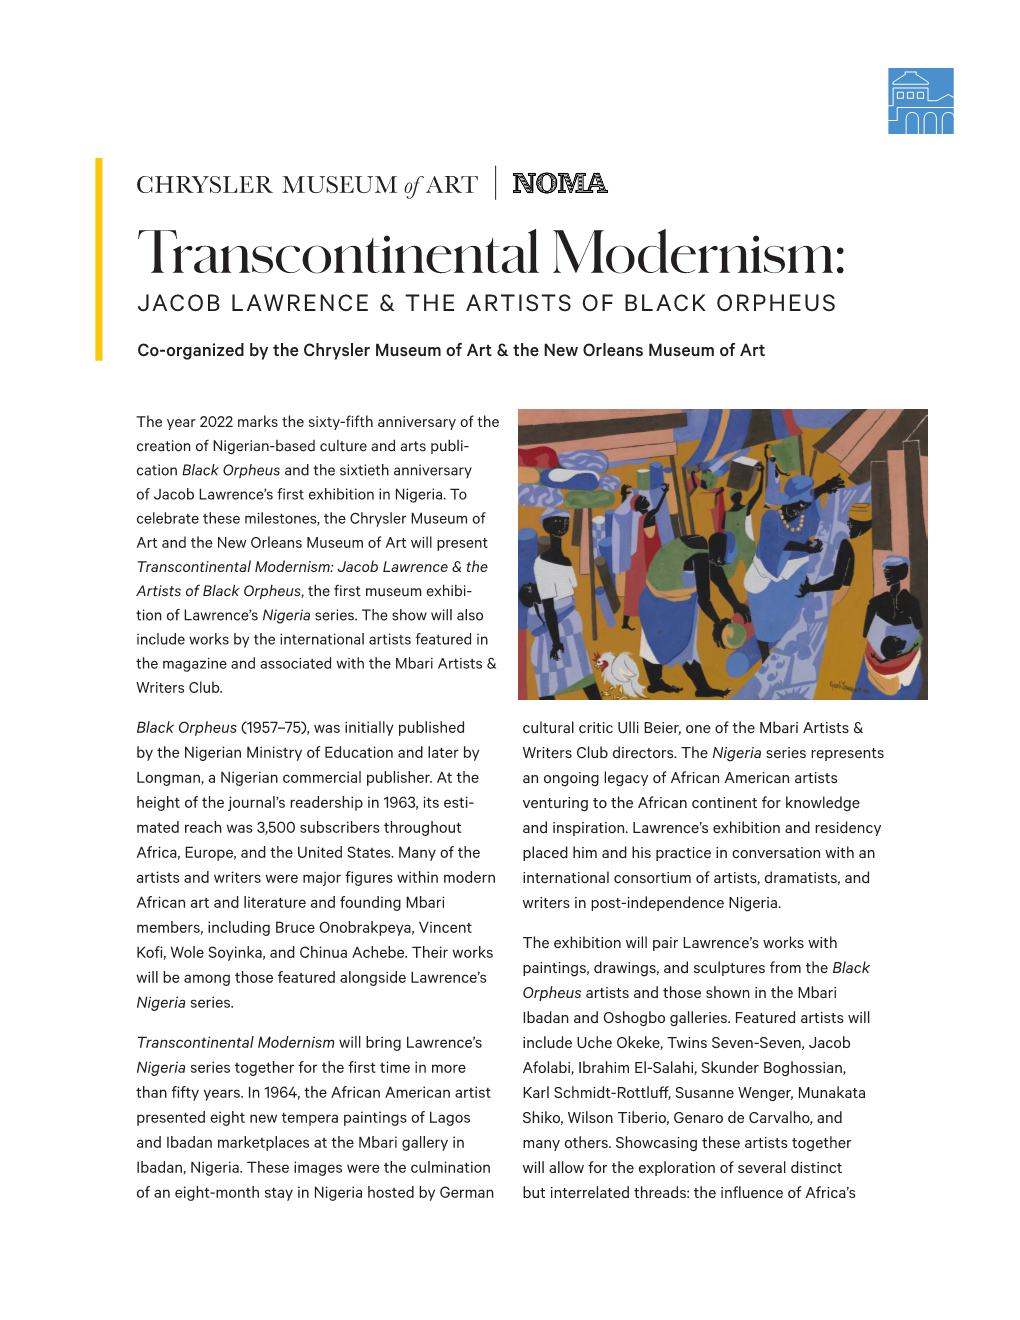 Transcontinental Modernism: JACOB LAWRENCE & the ARTISTS of BLACK ORPHEUS